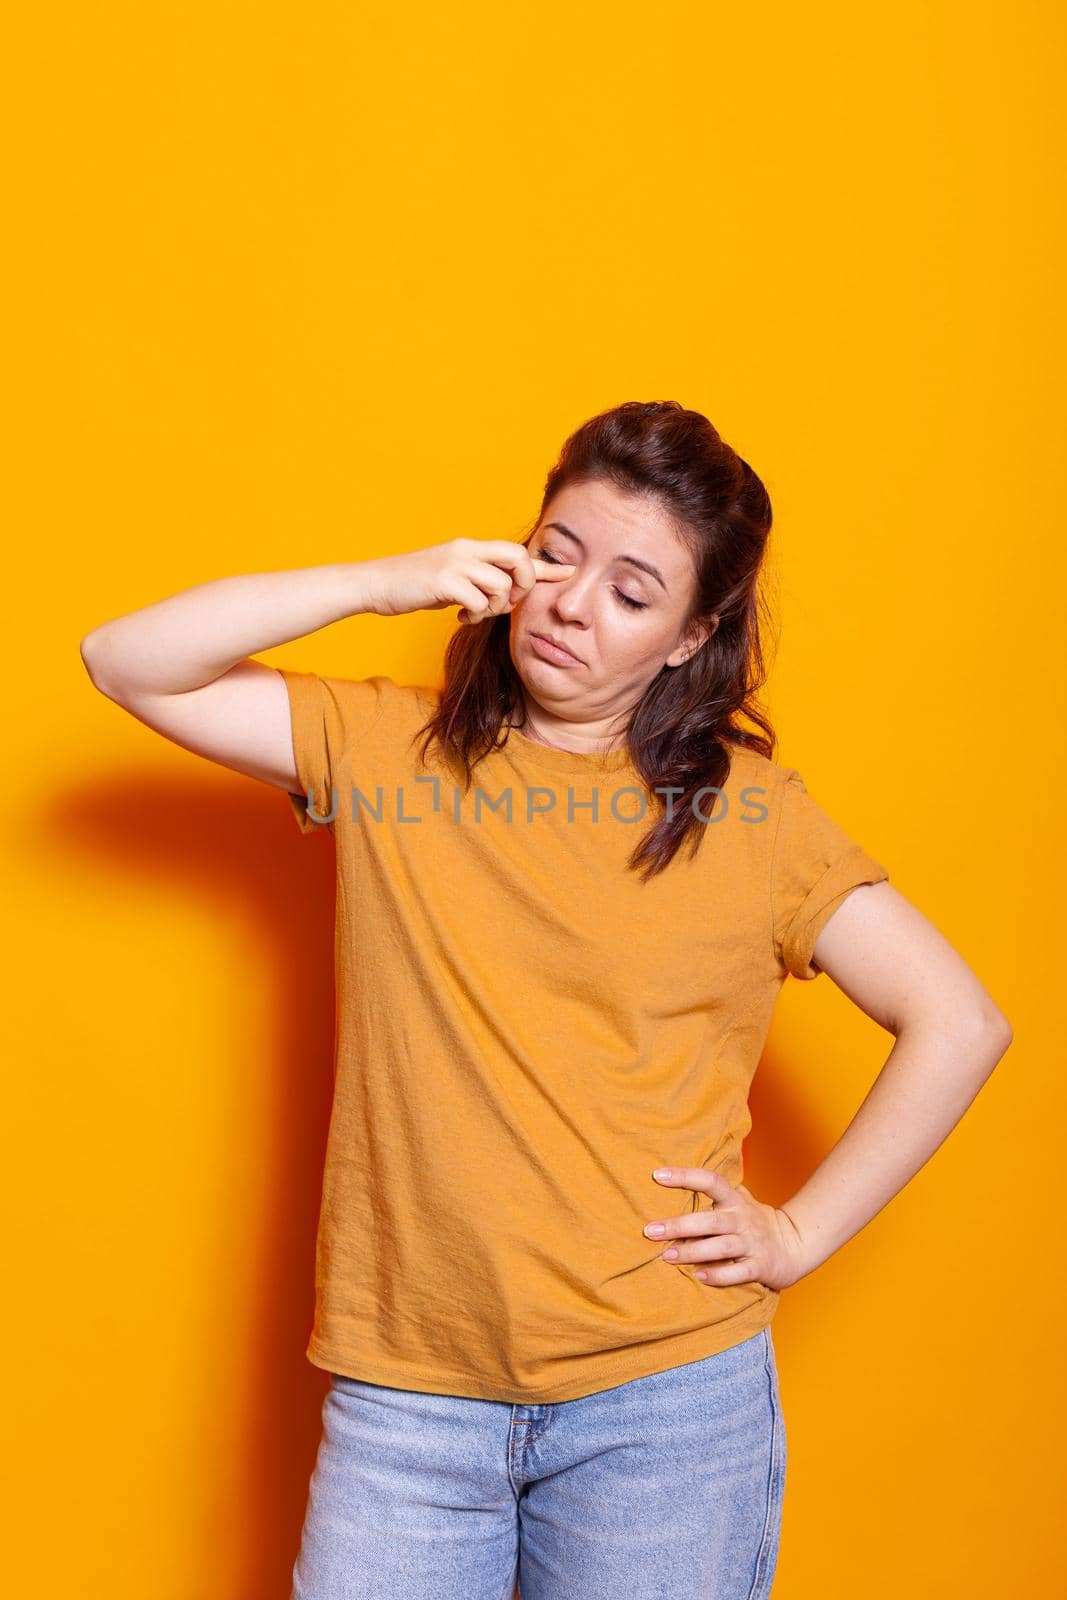 Caucasian woman rubbing hand on eyes feeling sleepy in studio. Tired person falling asleep while posing and standing over isolated background. Exhausted sleepless adult needing rest